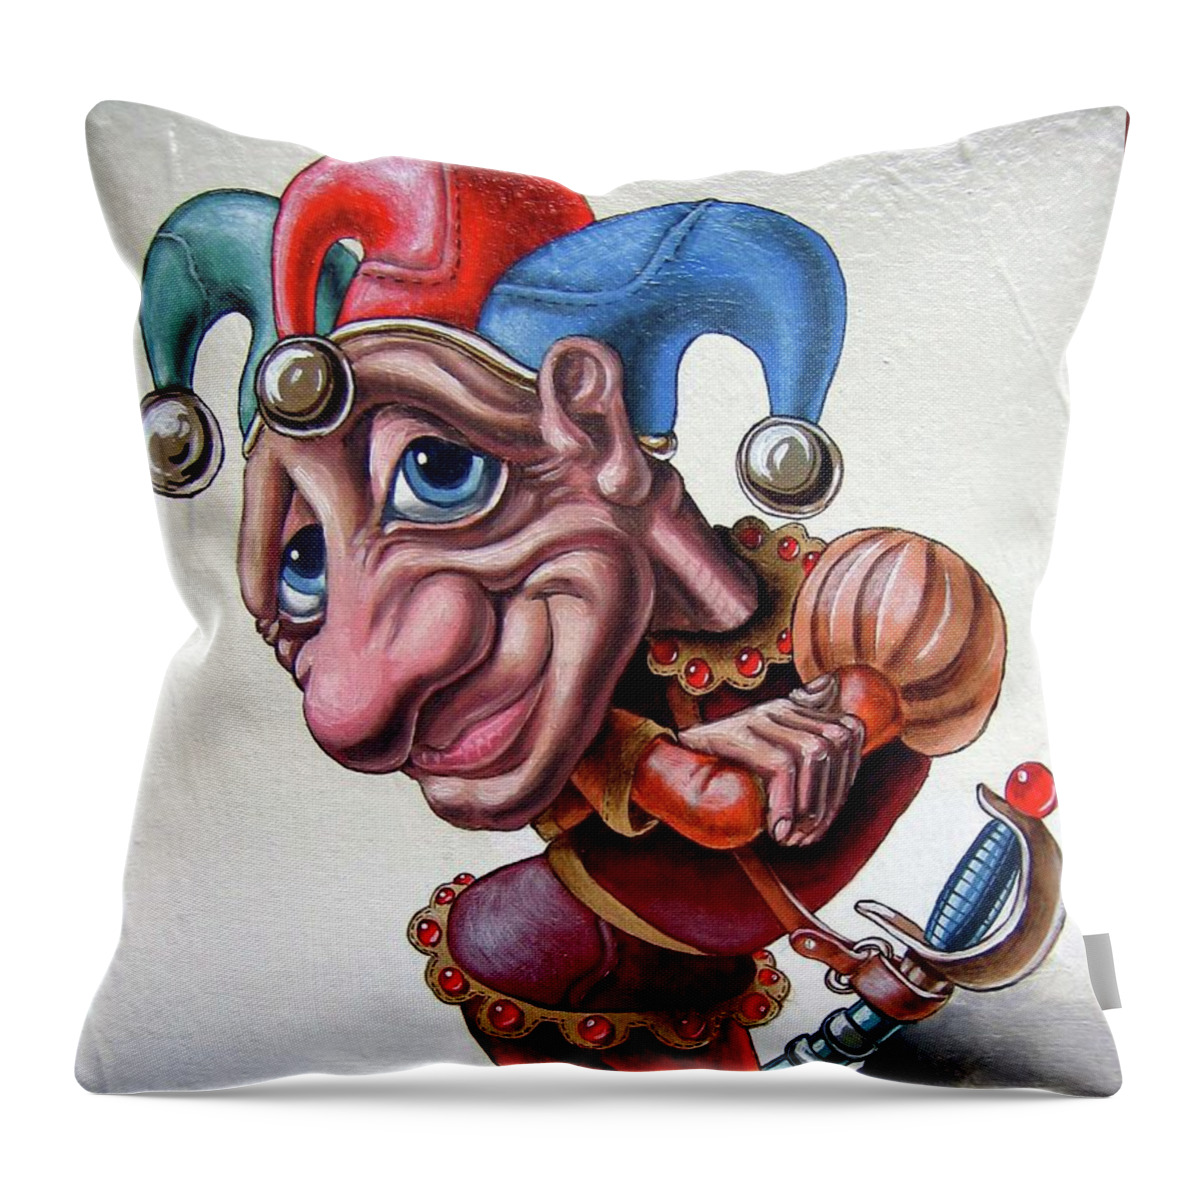 Jester Throw Pillow featuring the painting Jester by Victor Molev